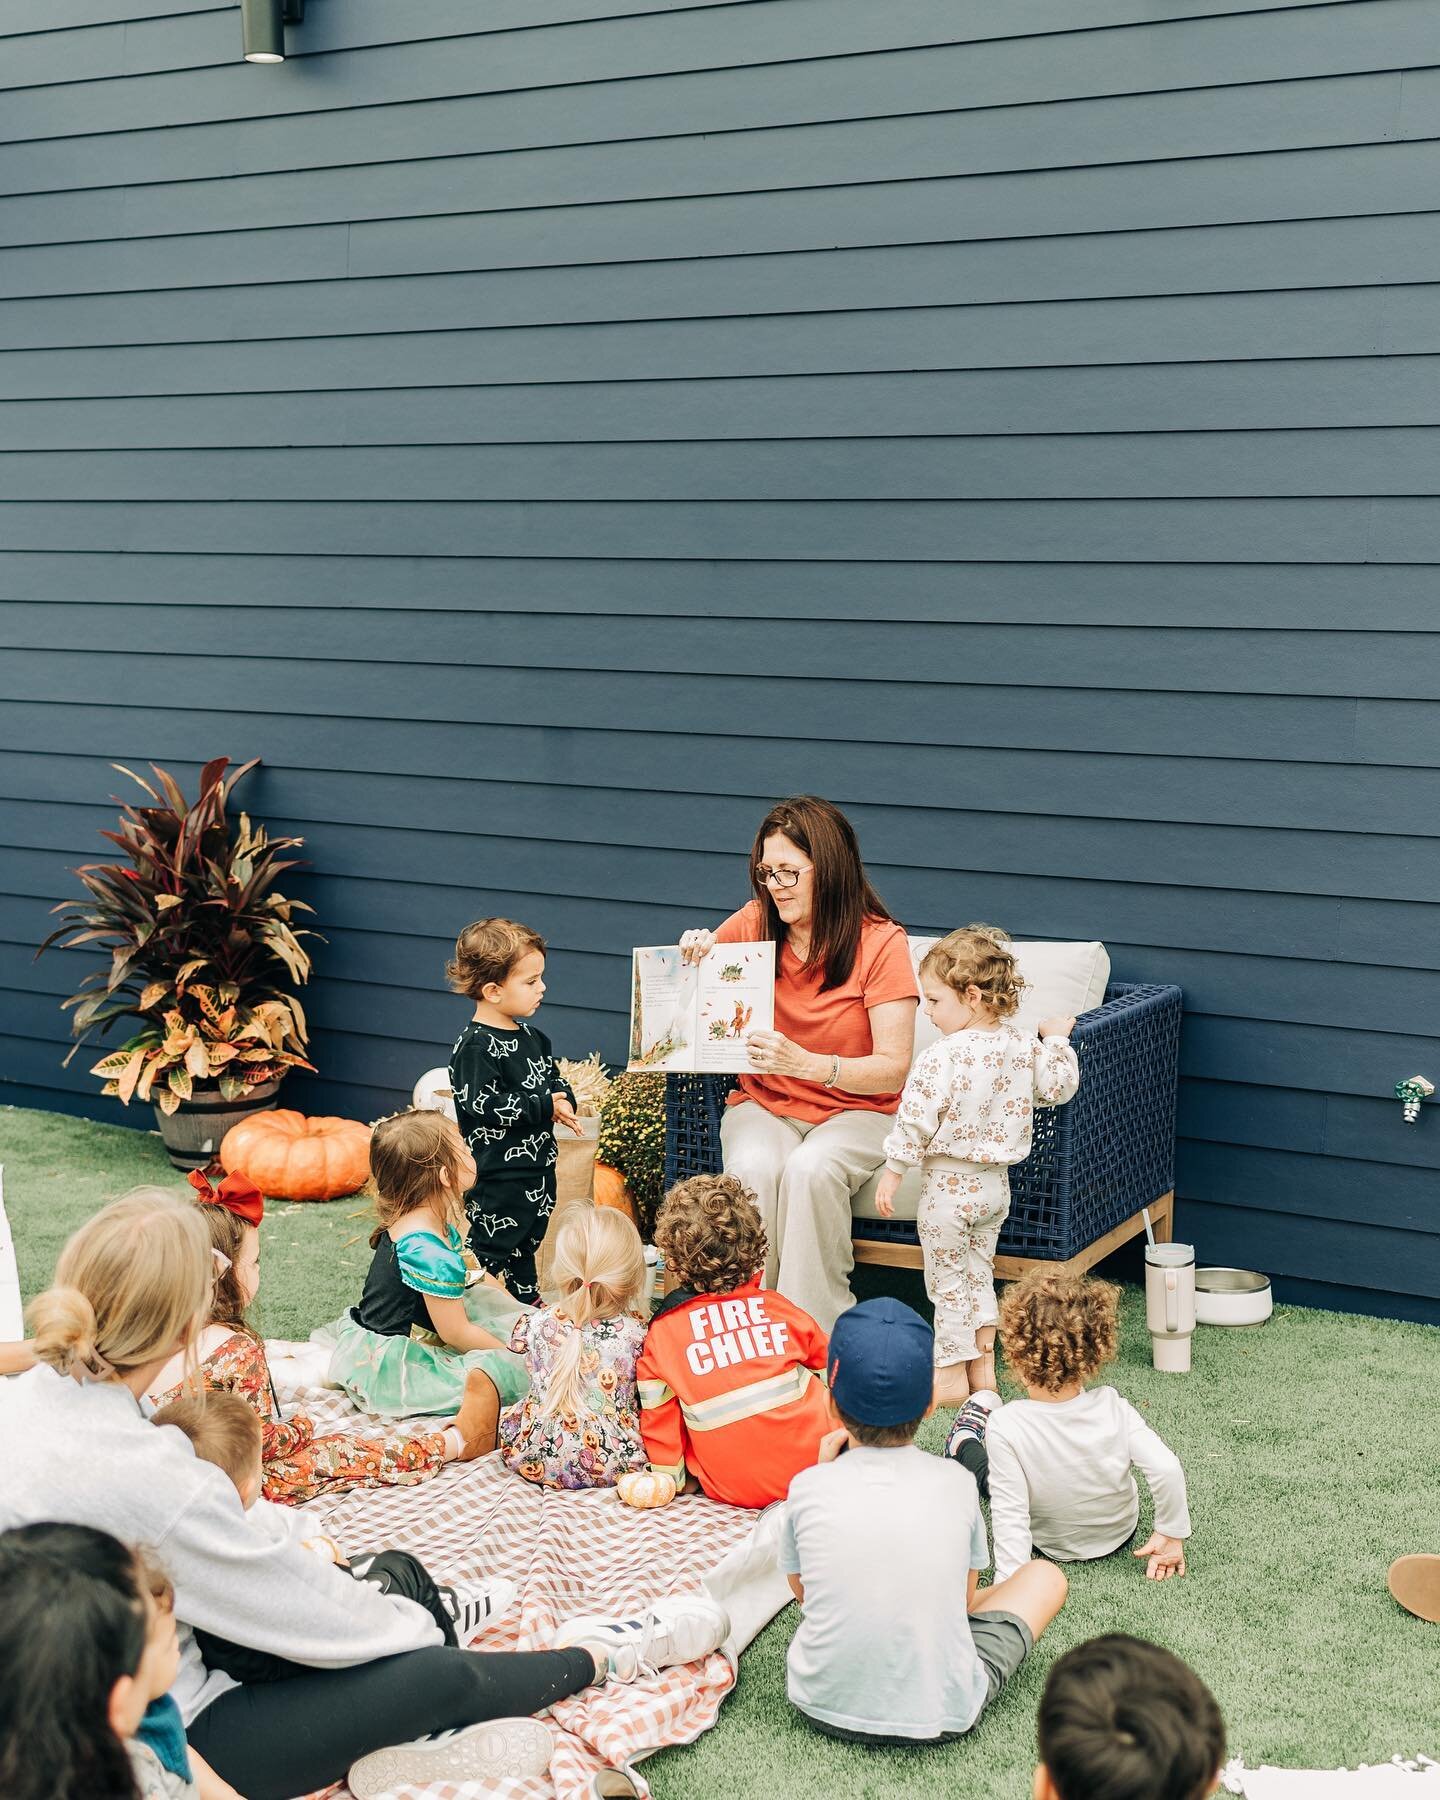 November 13th we will be hosting another Story Time! Bring your little turkeys by from 10:30-11:30am for fun and friendship. 💛